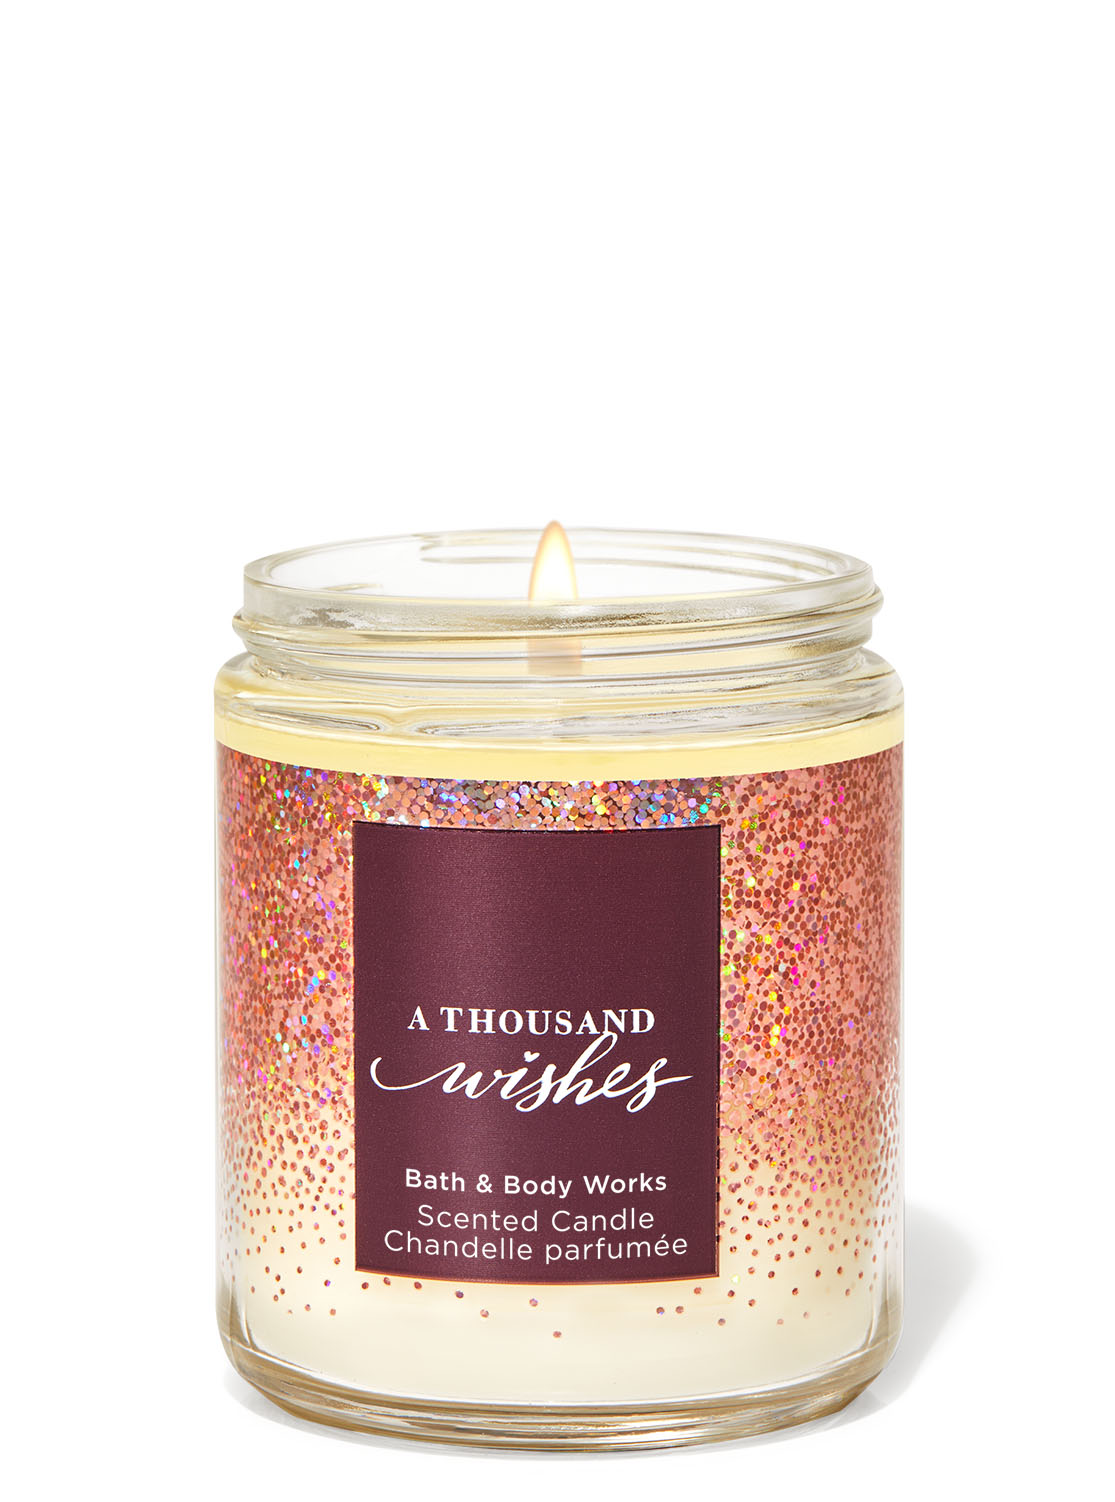 Wishes Scented. Bath body works свечи